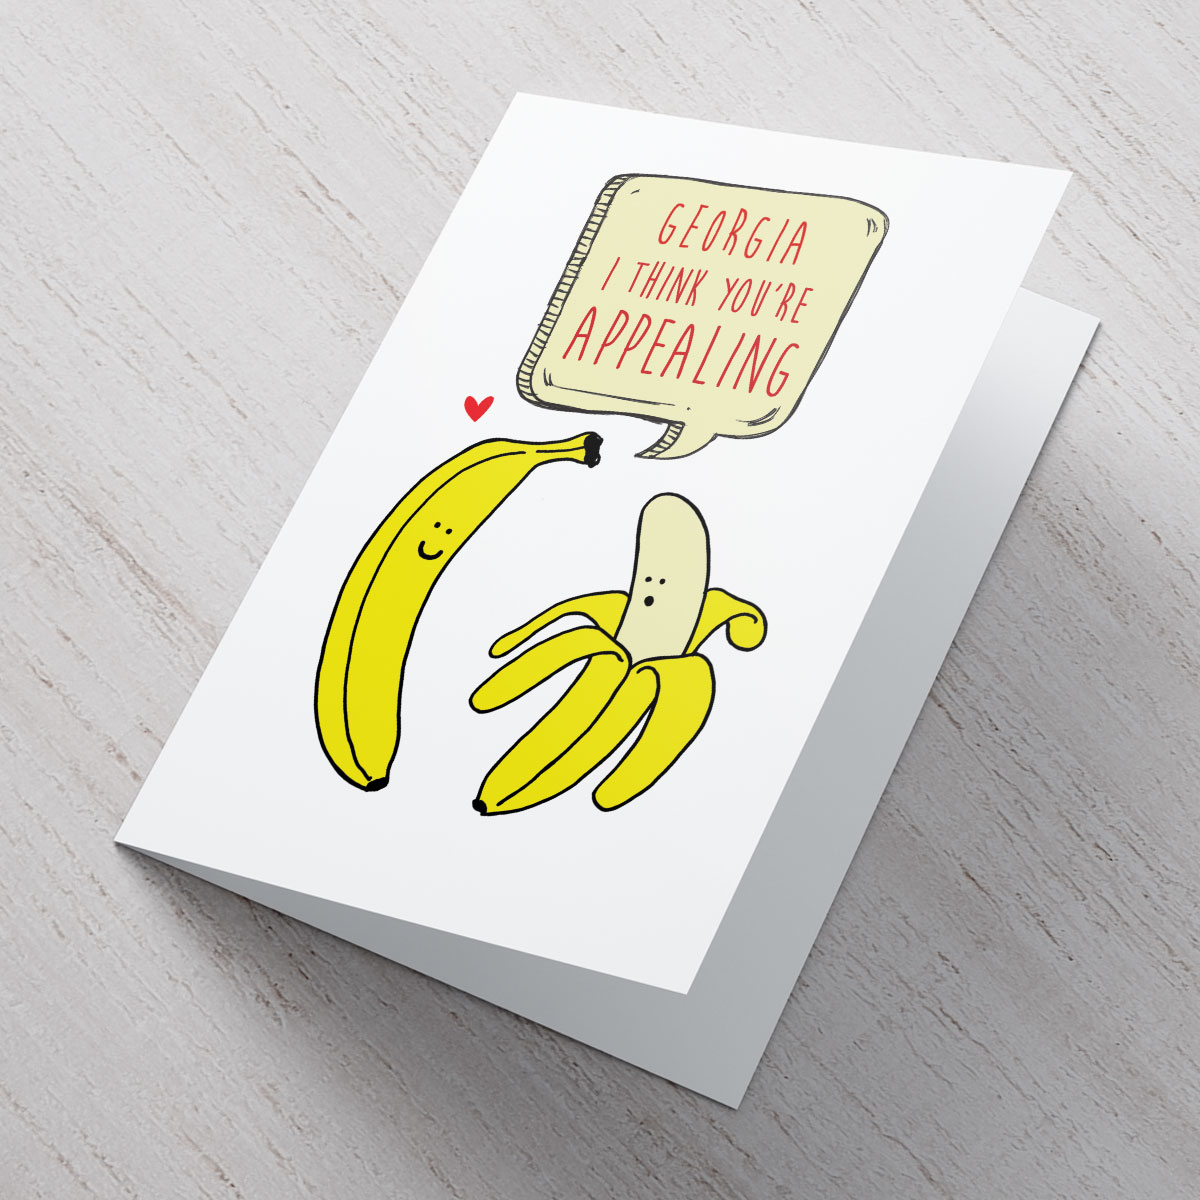 Personalised Valentine's Card - Appealing Banana